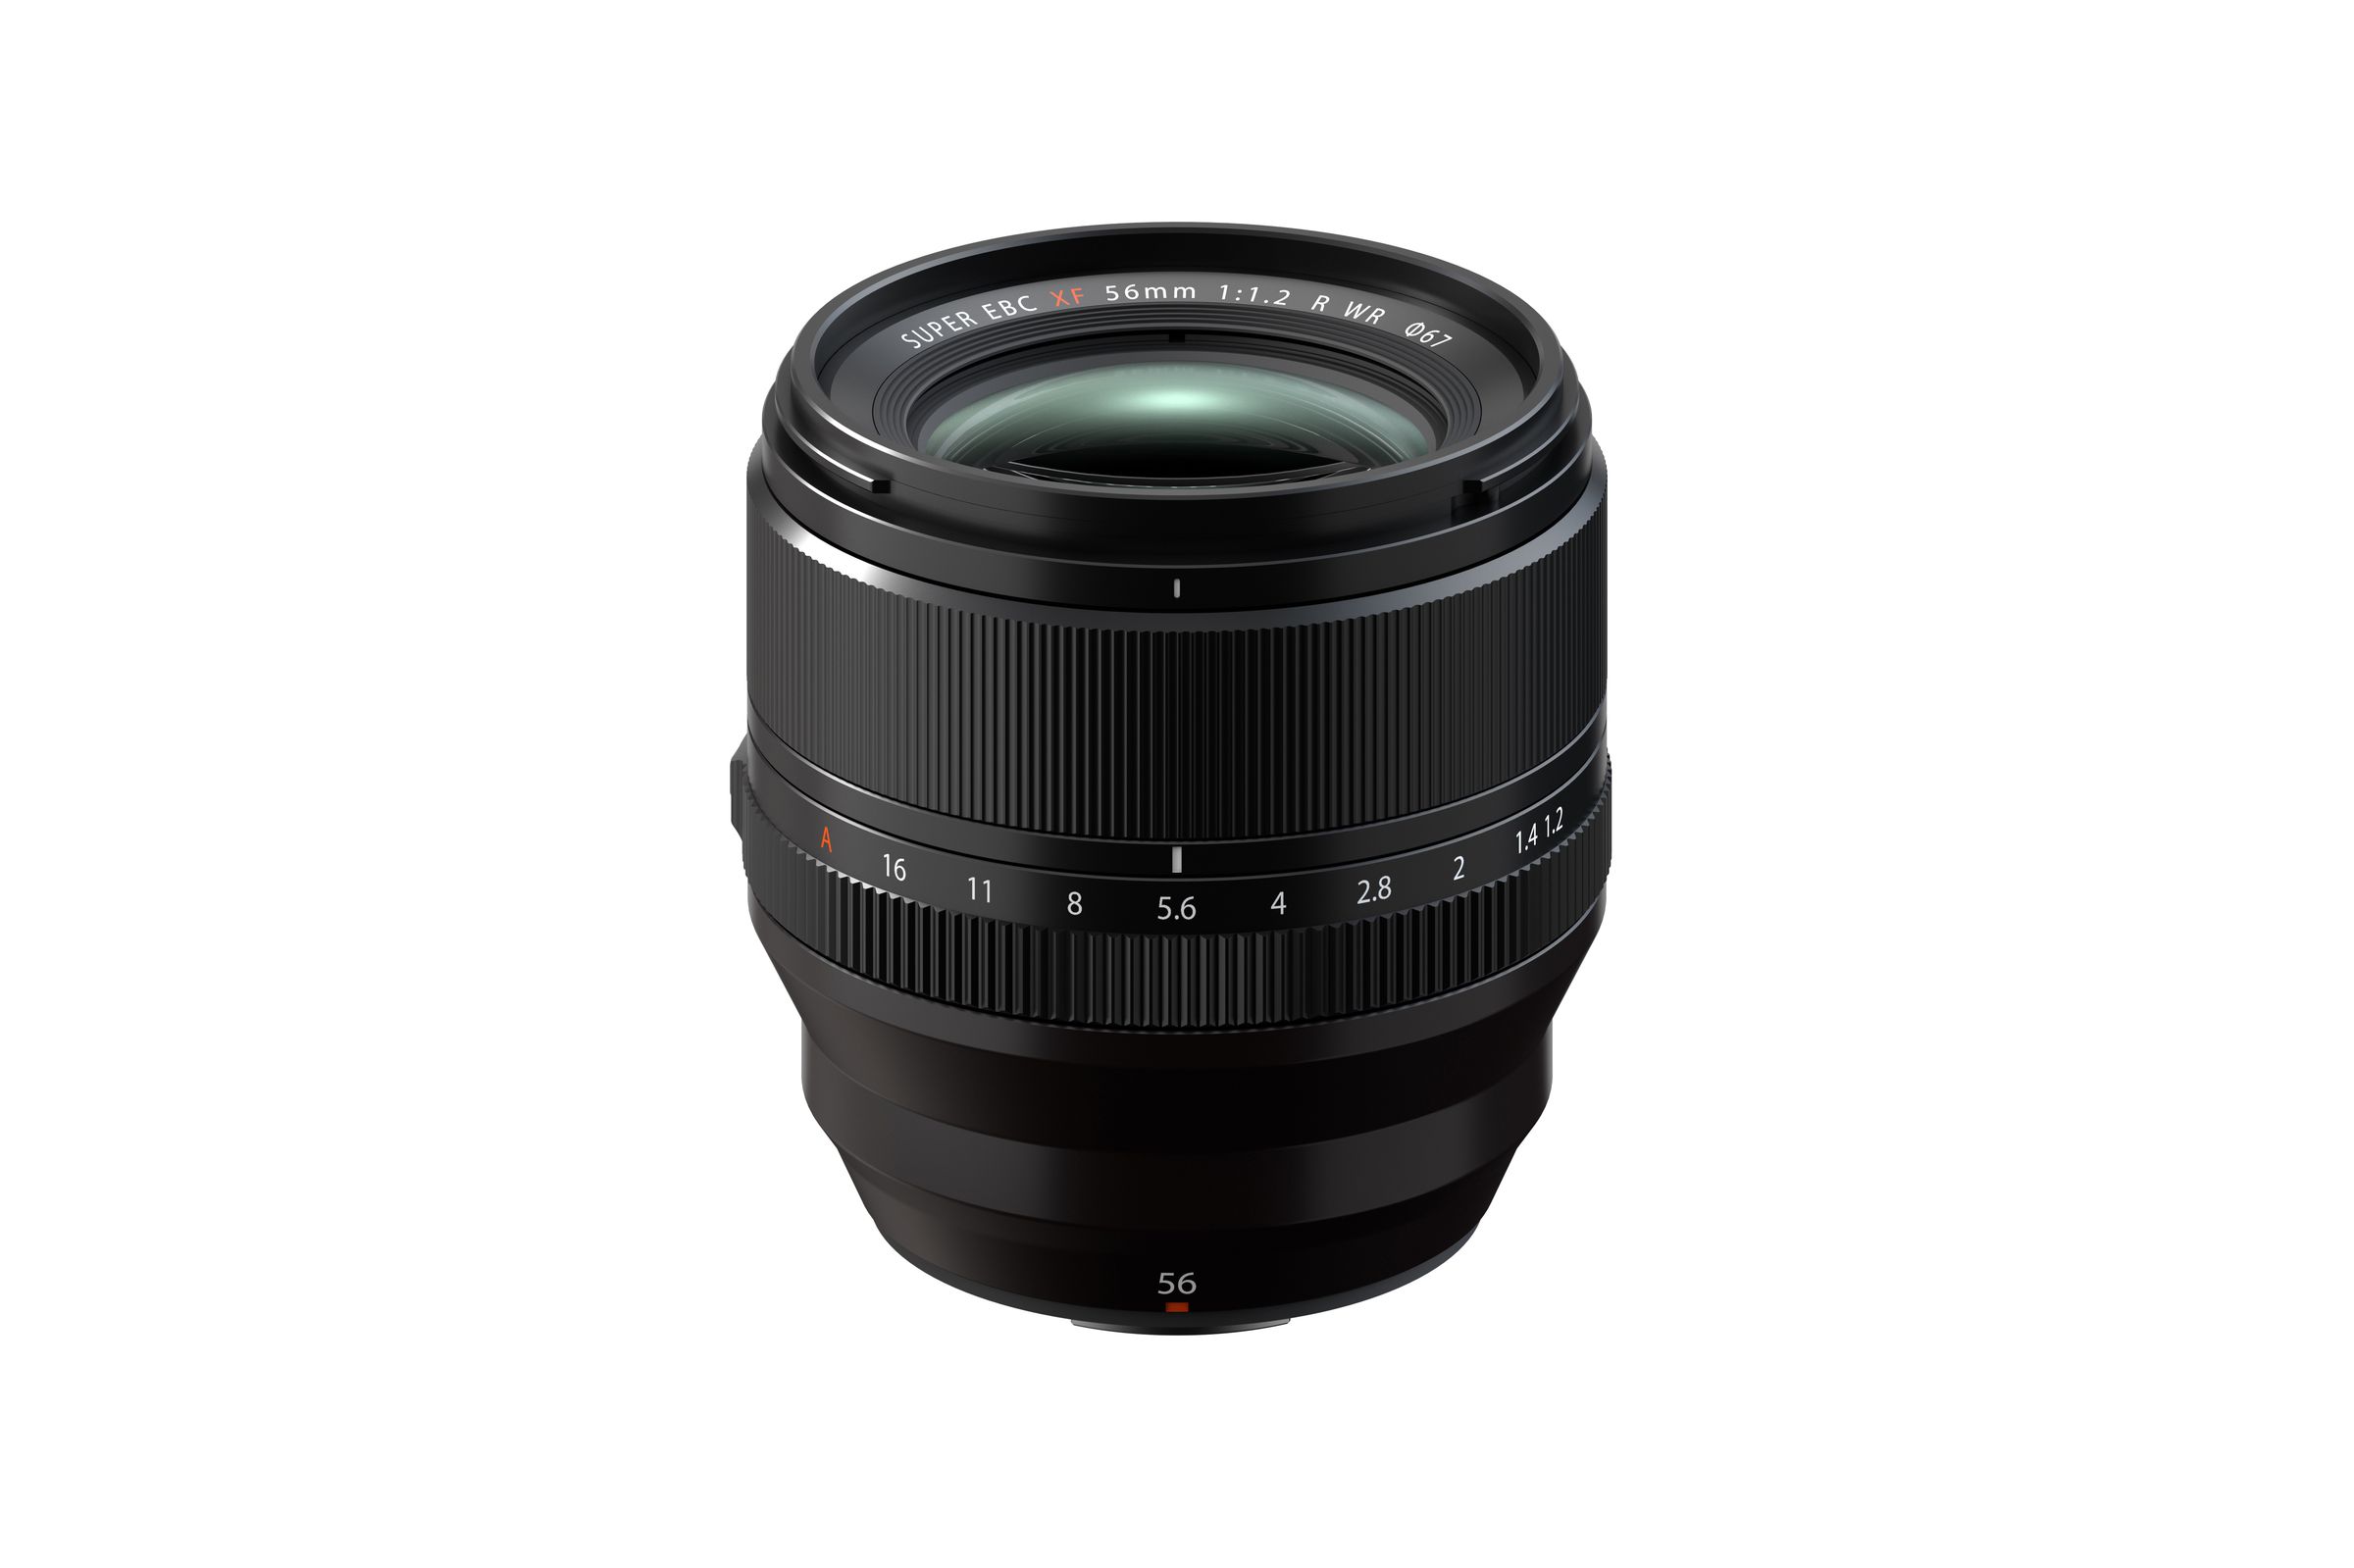 <em>The new weather-sealed Fujinon XF 56mm f/1.2 R WR replaces the older model from 2014.</em>